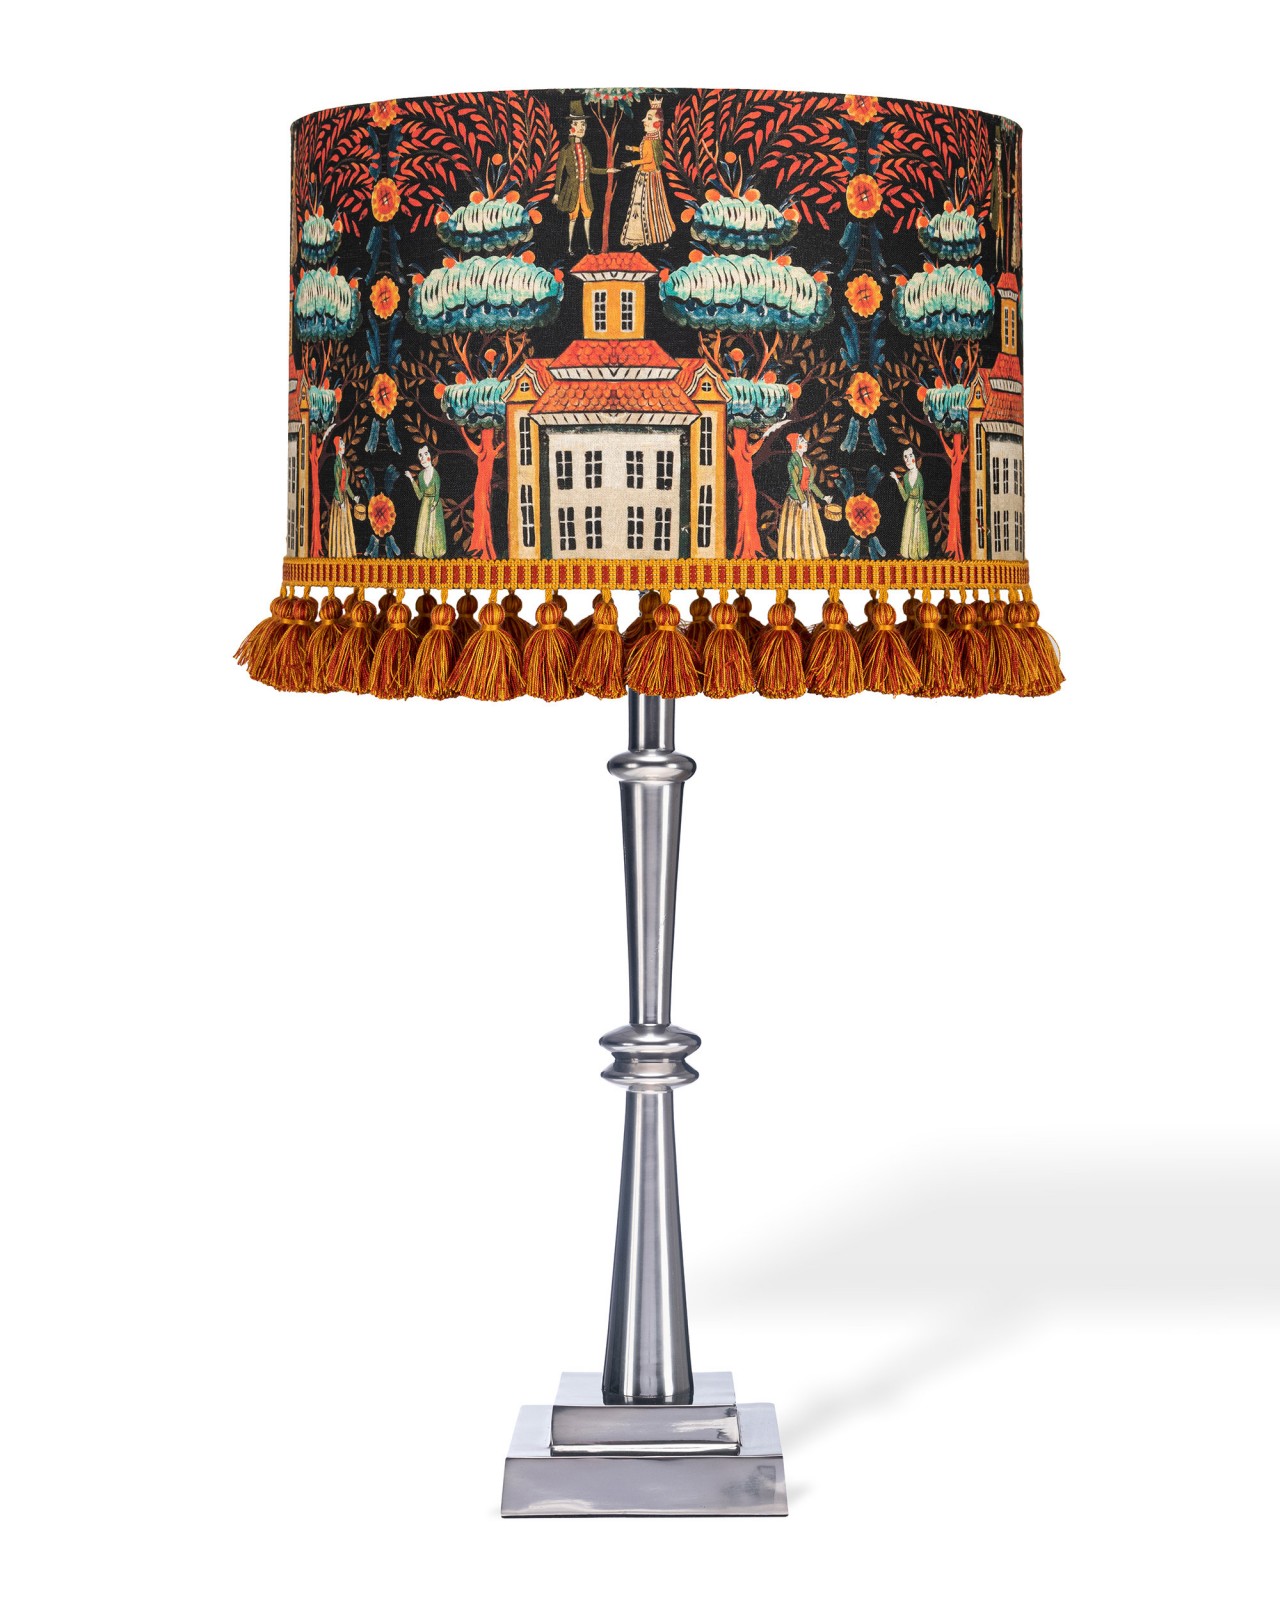 TALES OF TYROL Lampshade